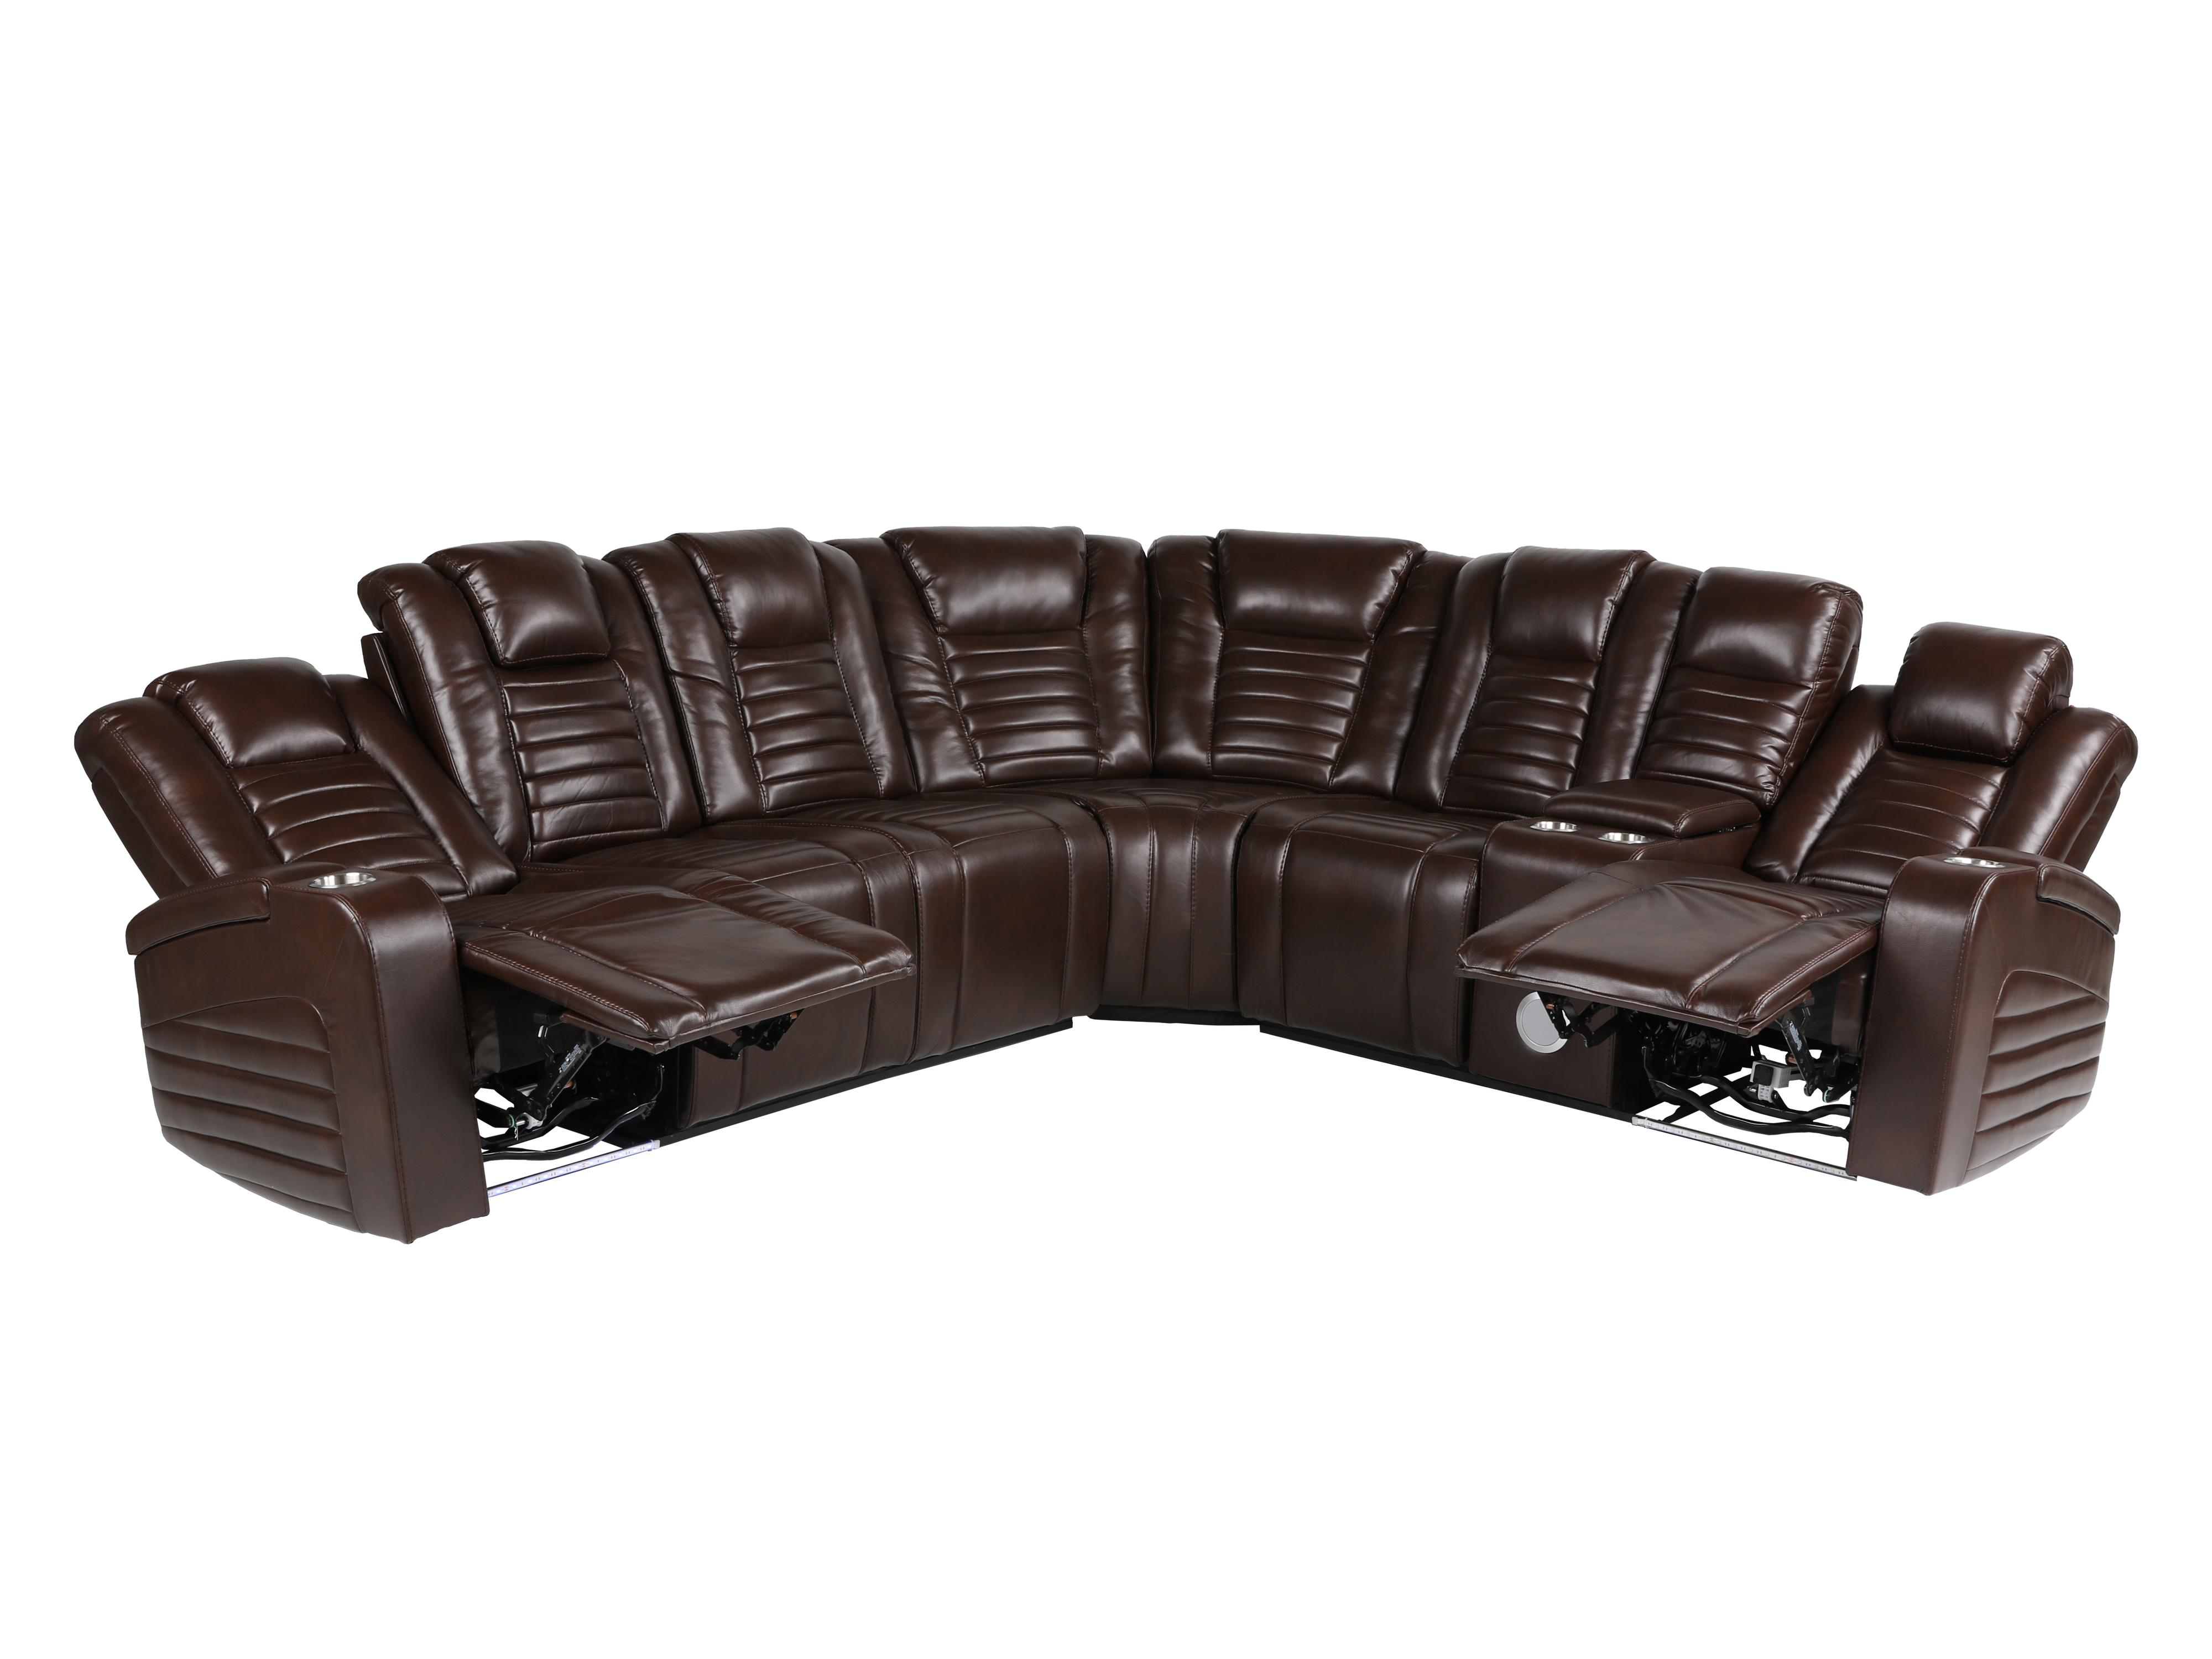 3 Piece Power Reclining Sectional With Power Adjustable Headrest, Wireless USB charging, Reading Light, Bluetooth Speakers